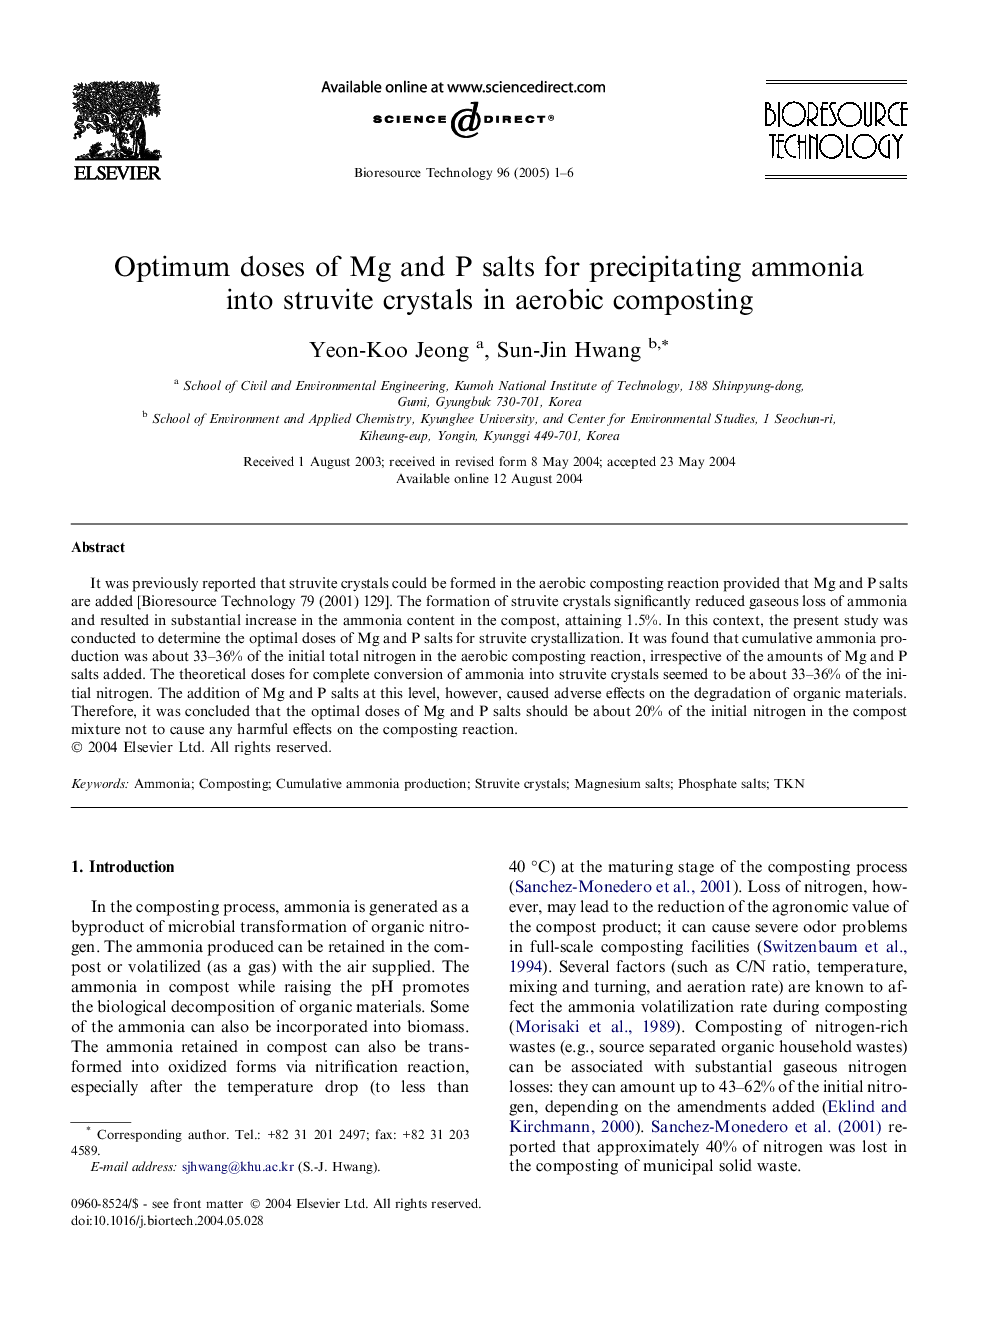 Optimum doses of Mg and P salts for precipitating ammonia into struvite crystals in aerobic composting